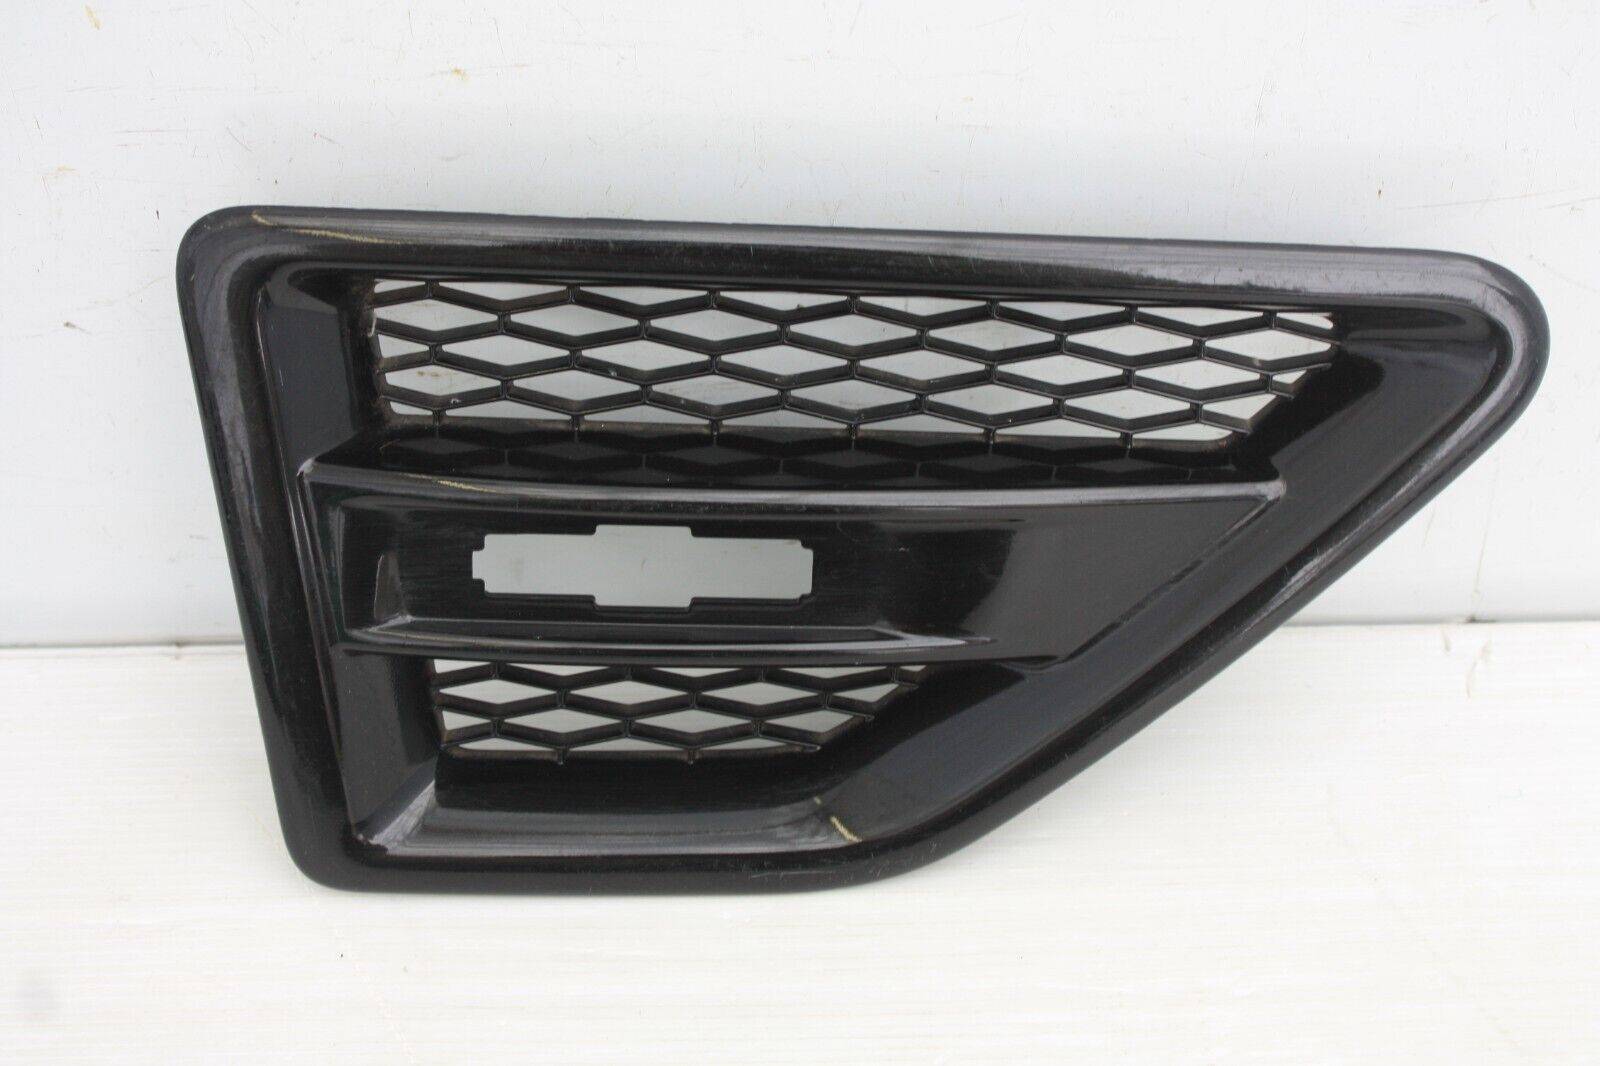 Land Rover Freelander Front Right Side Wing Grill 2007 to 2015 6H52 014K80 BB 176267107753